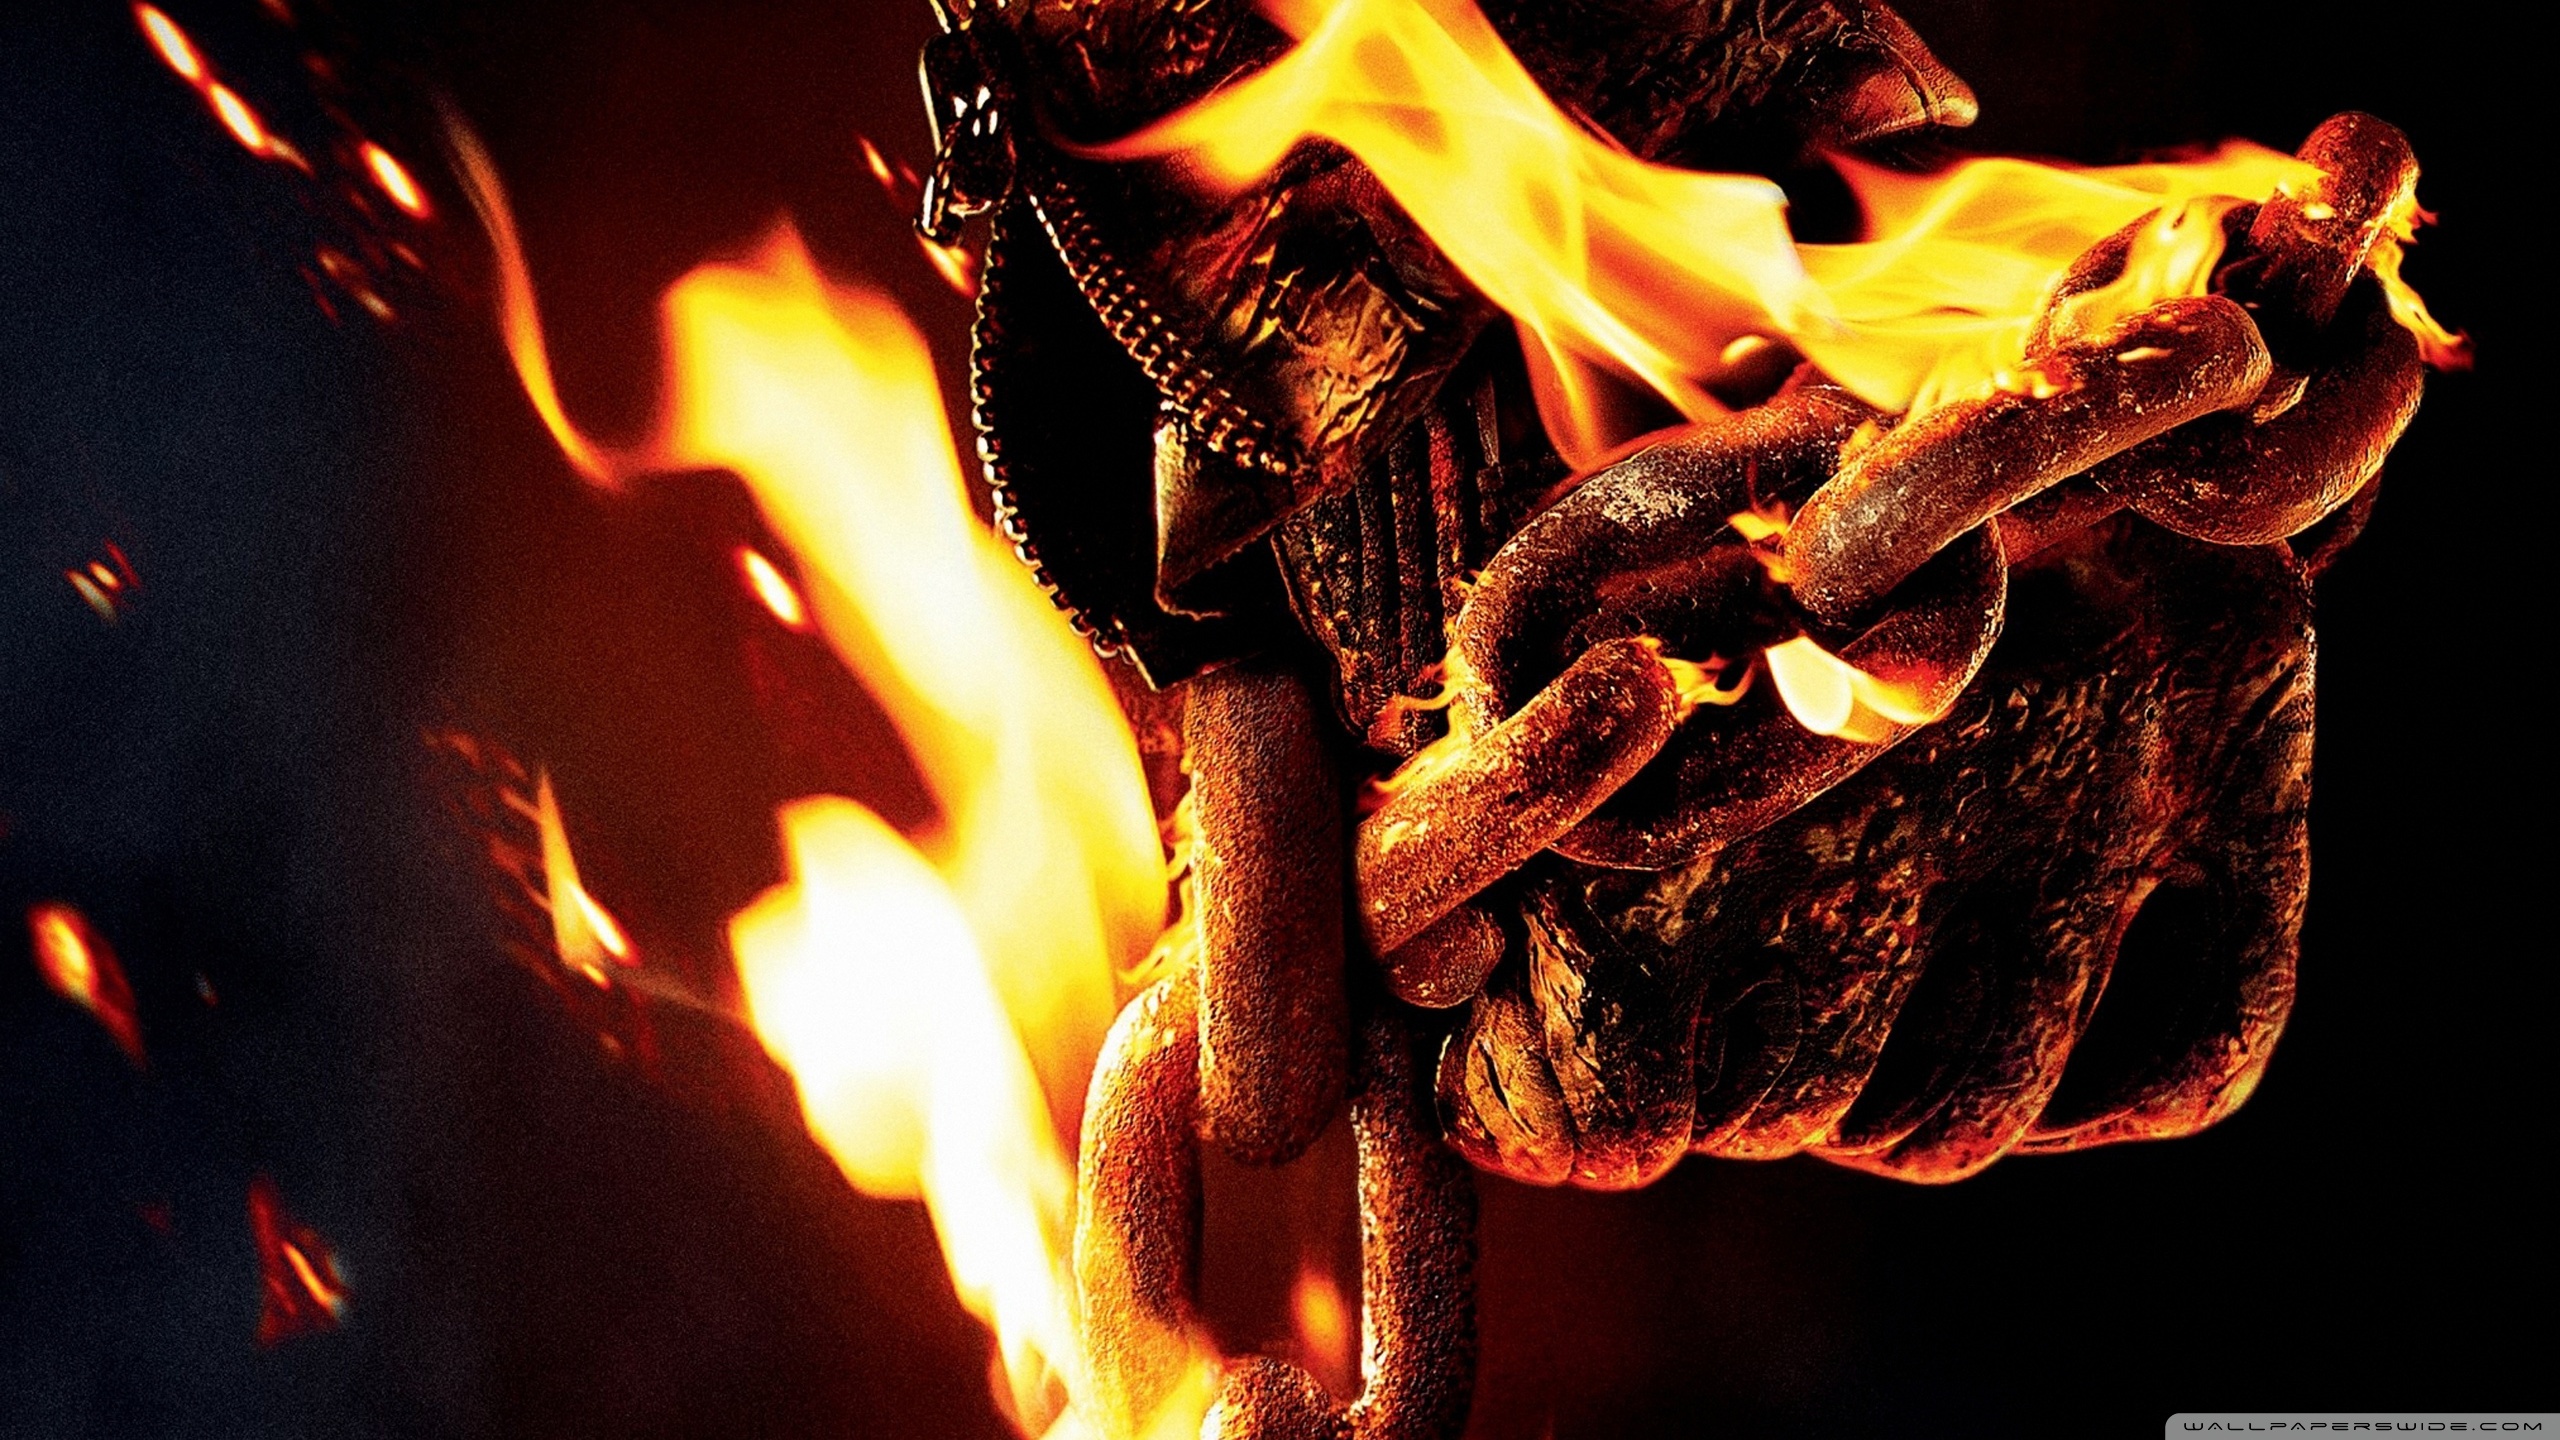 Cool Ghost Rider Wallpapers